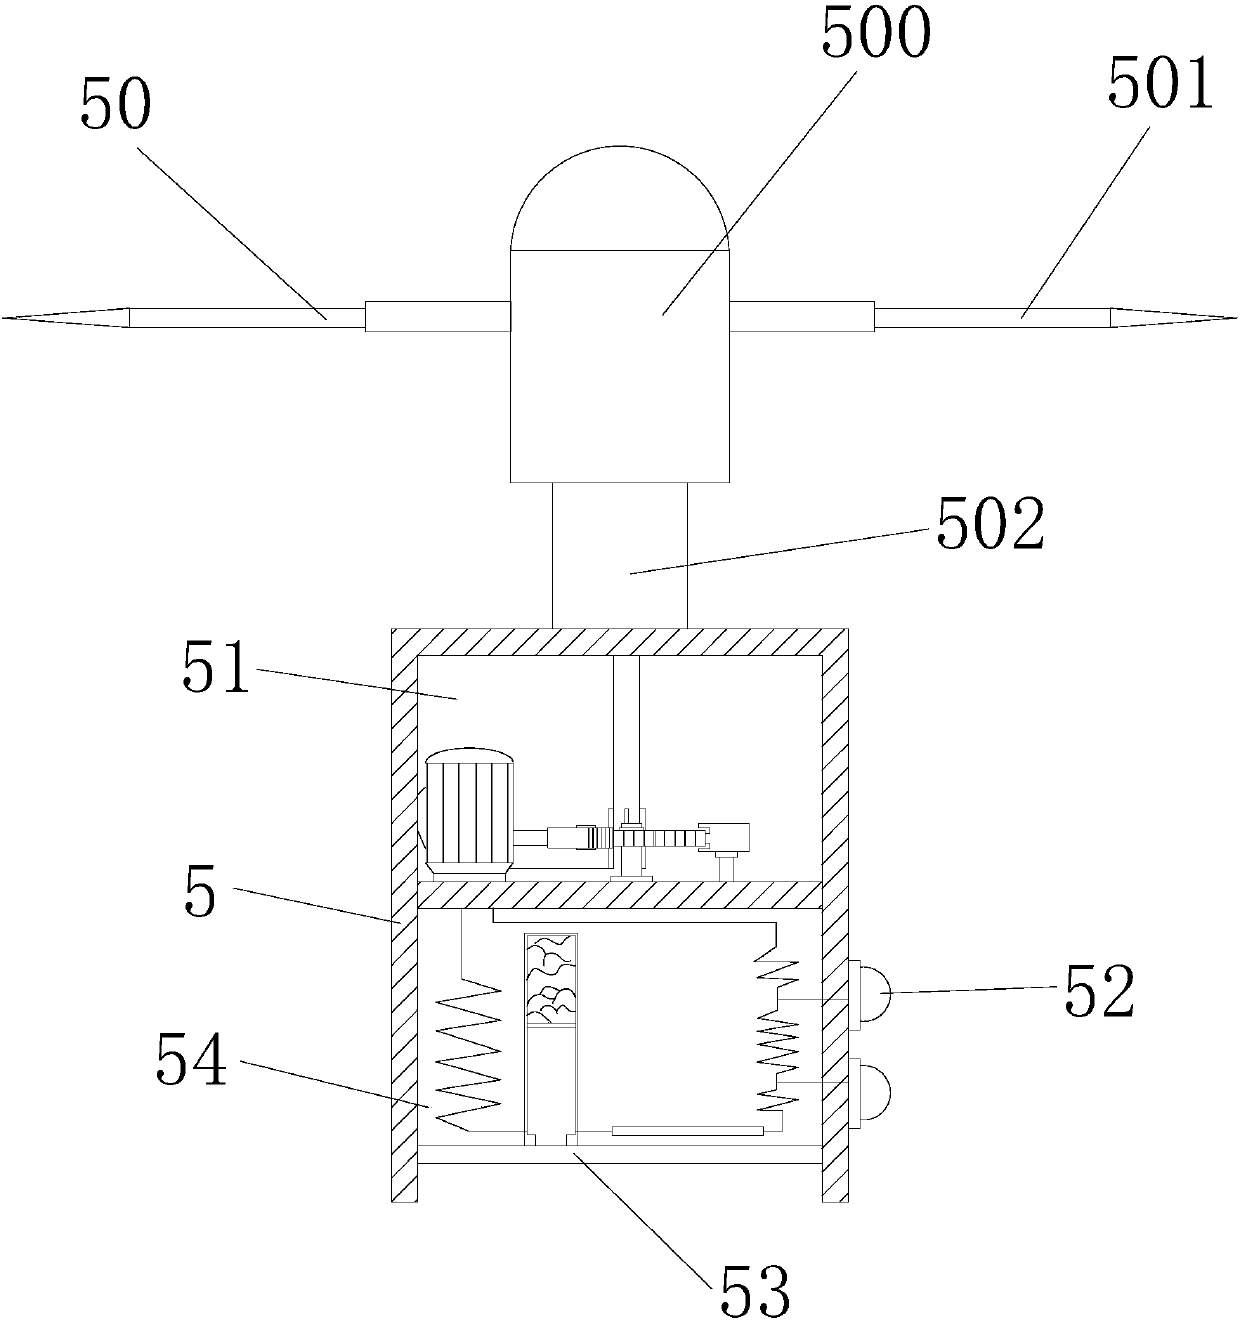 Unmanned aerial vehicle with folding linking arms